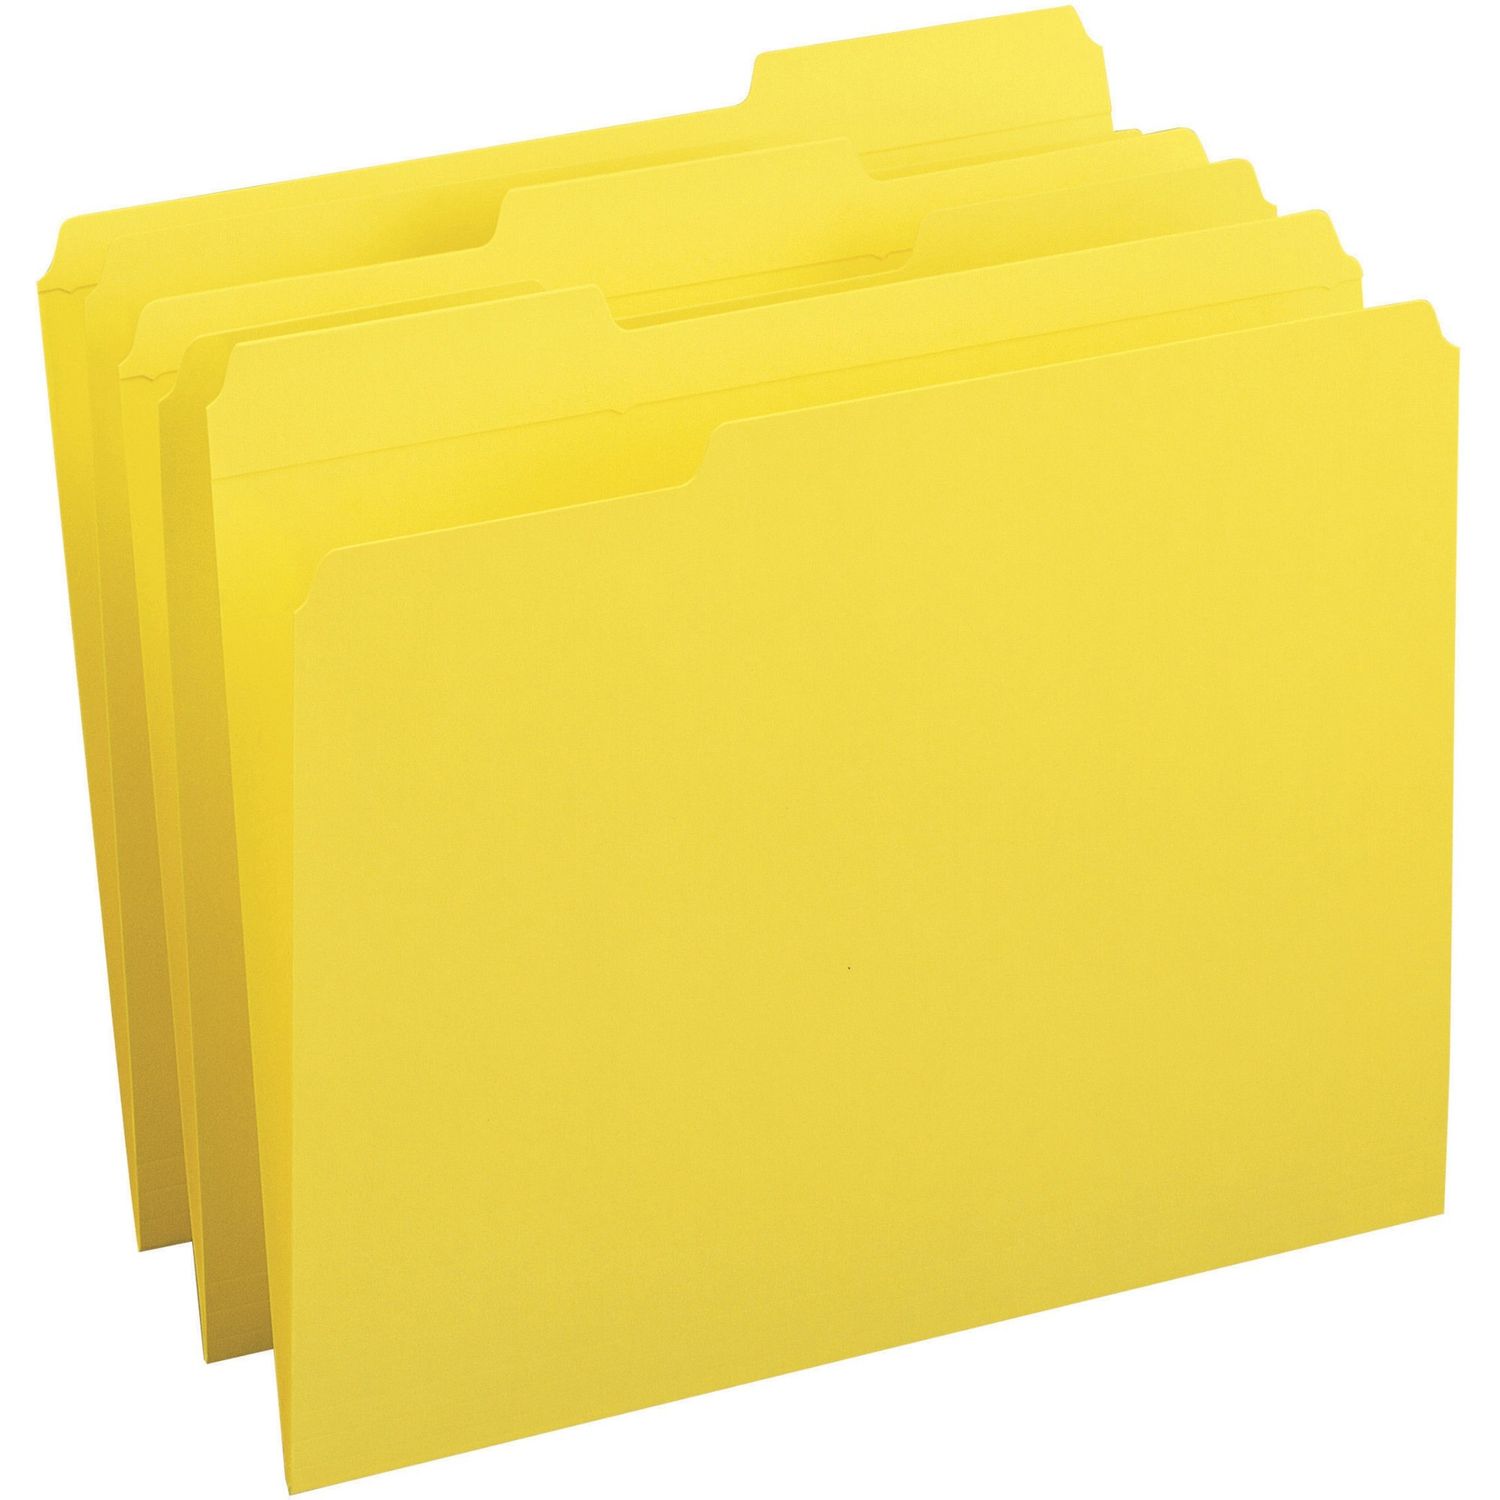 Reinforced Tab Colored File Folders Yellow, 100 / Box